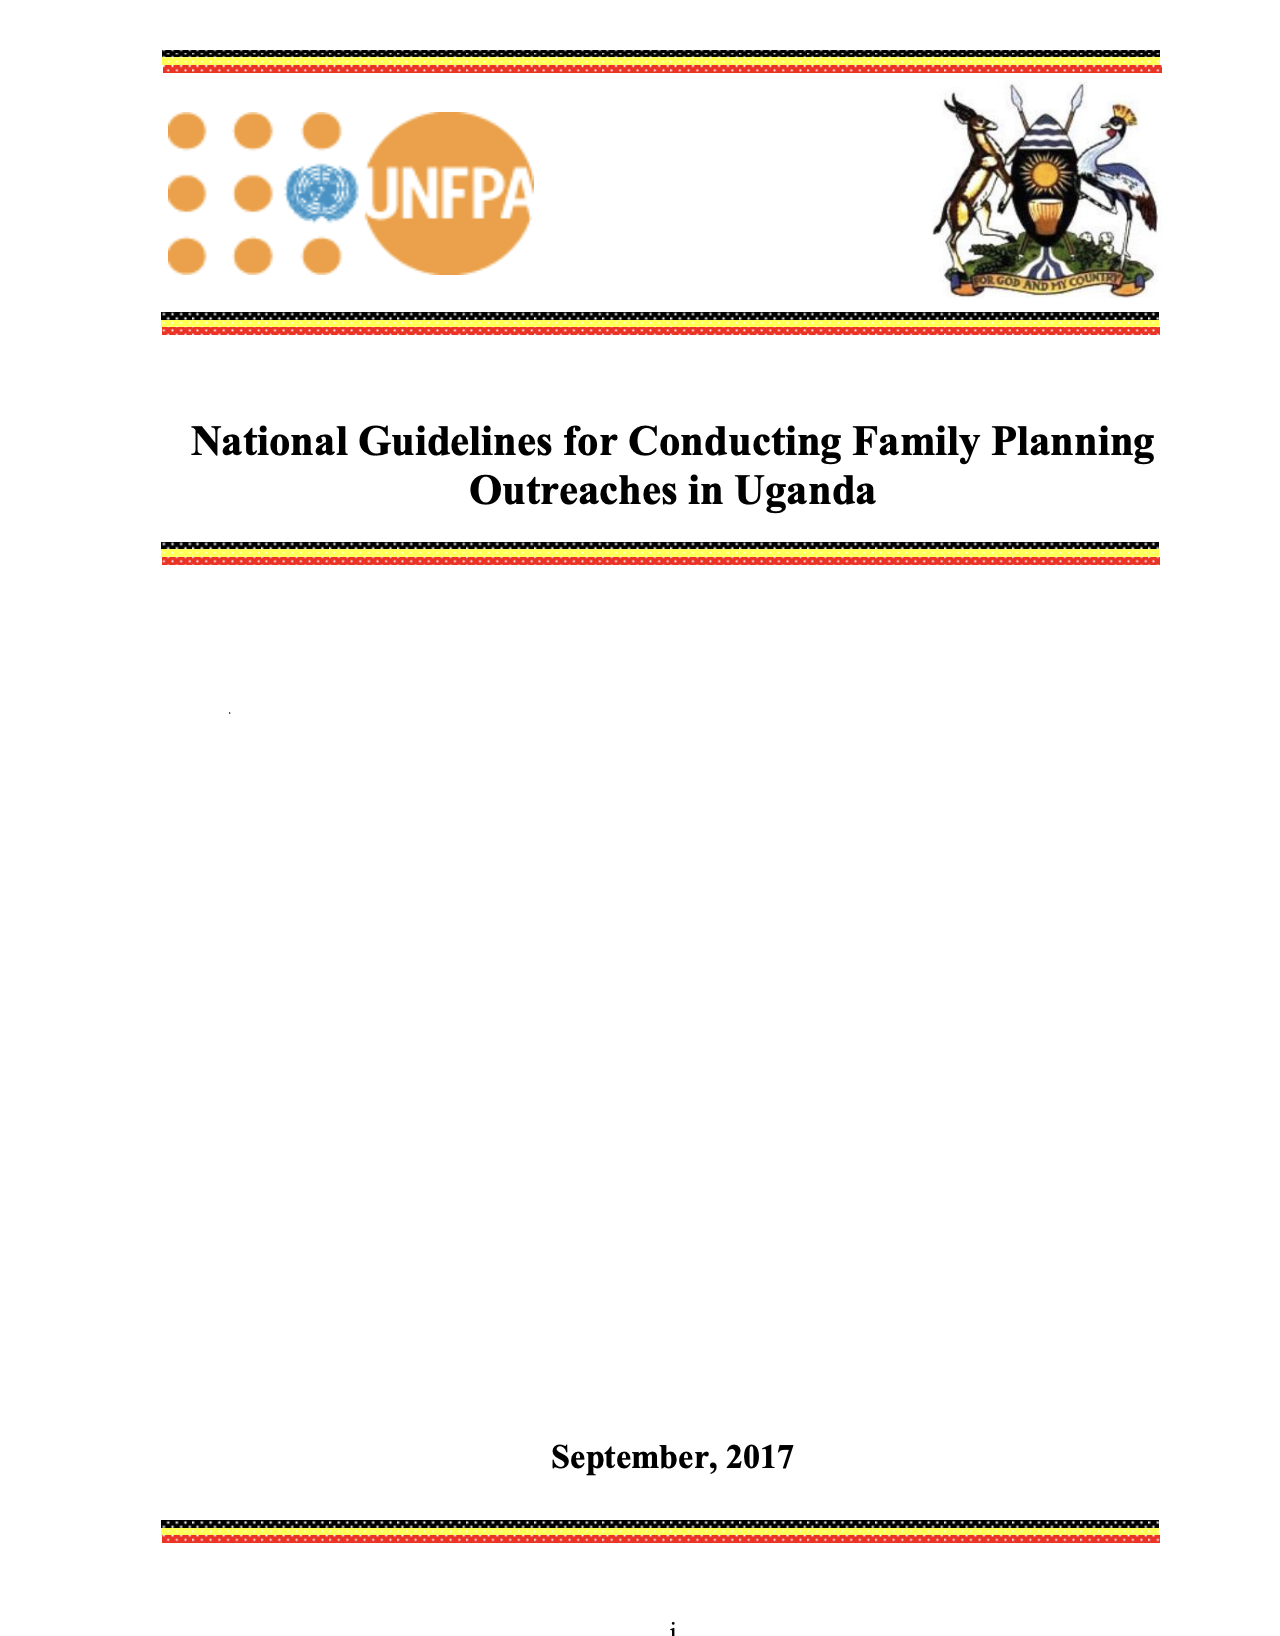 Family Planning Outreach Guidelines